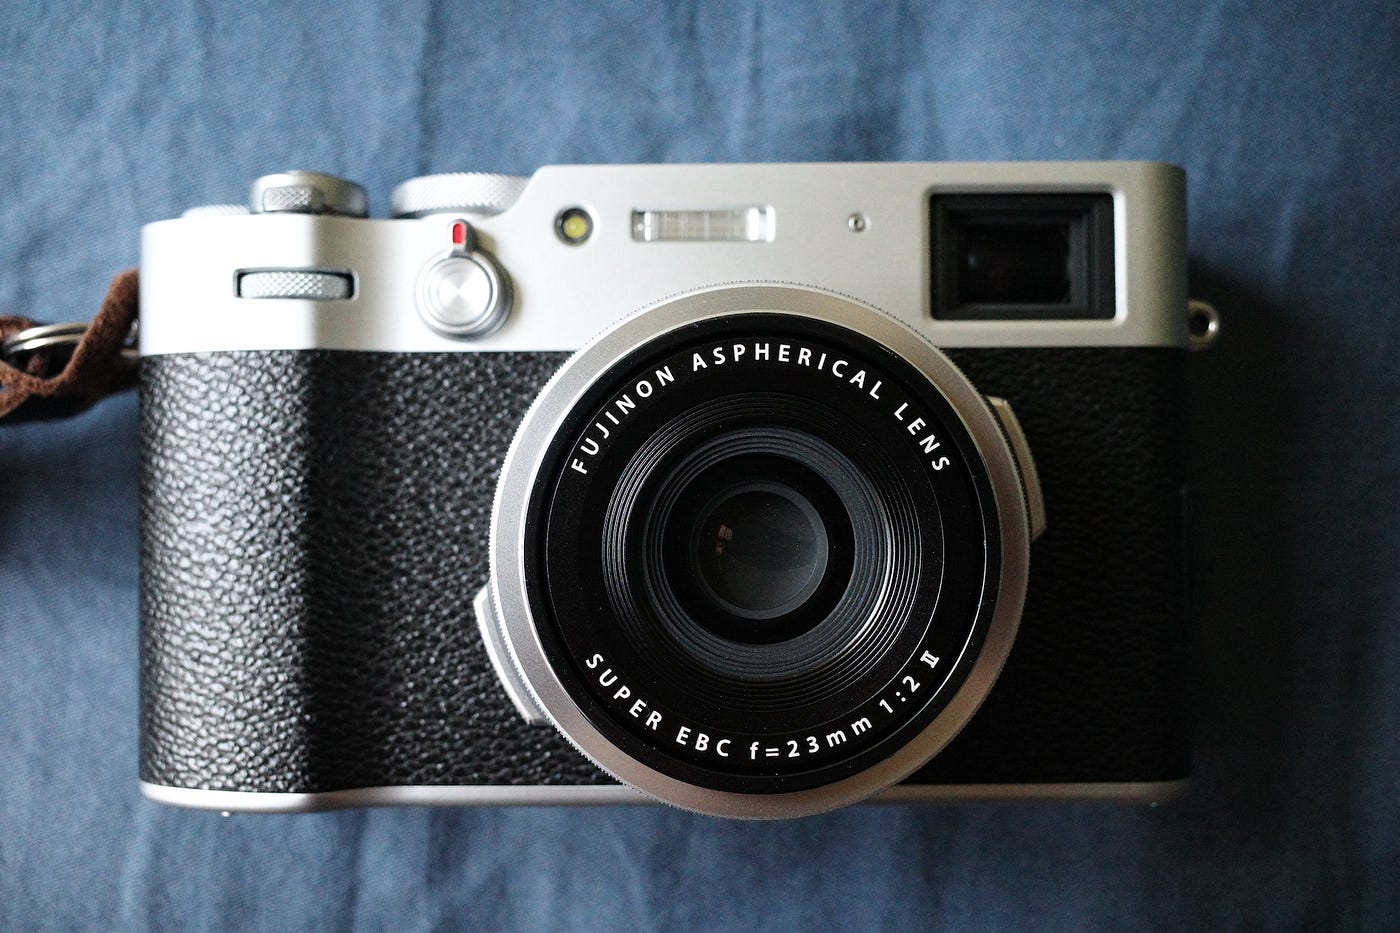 The impossible-to-find Fujifilm X100V could finally get a